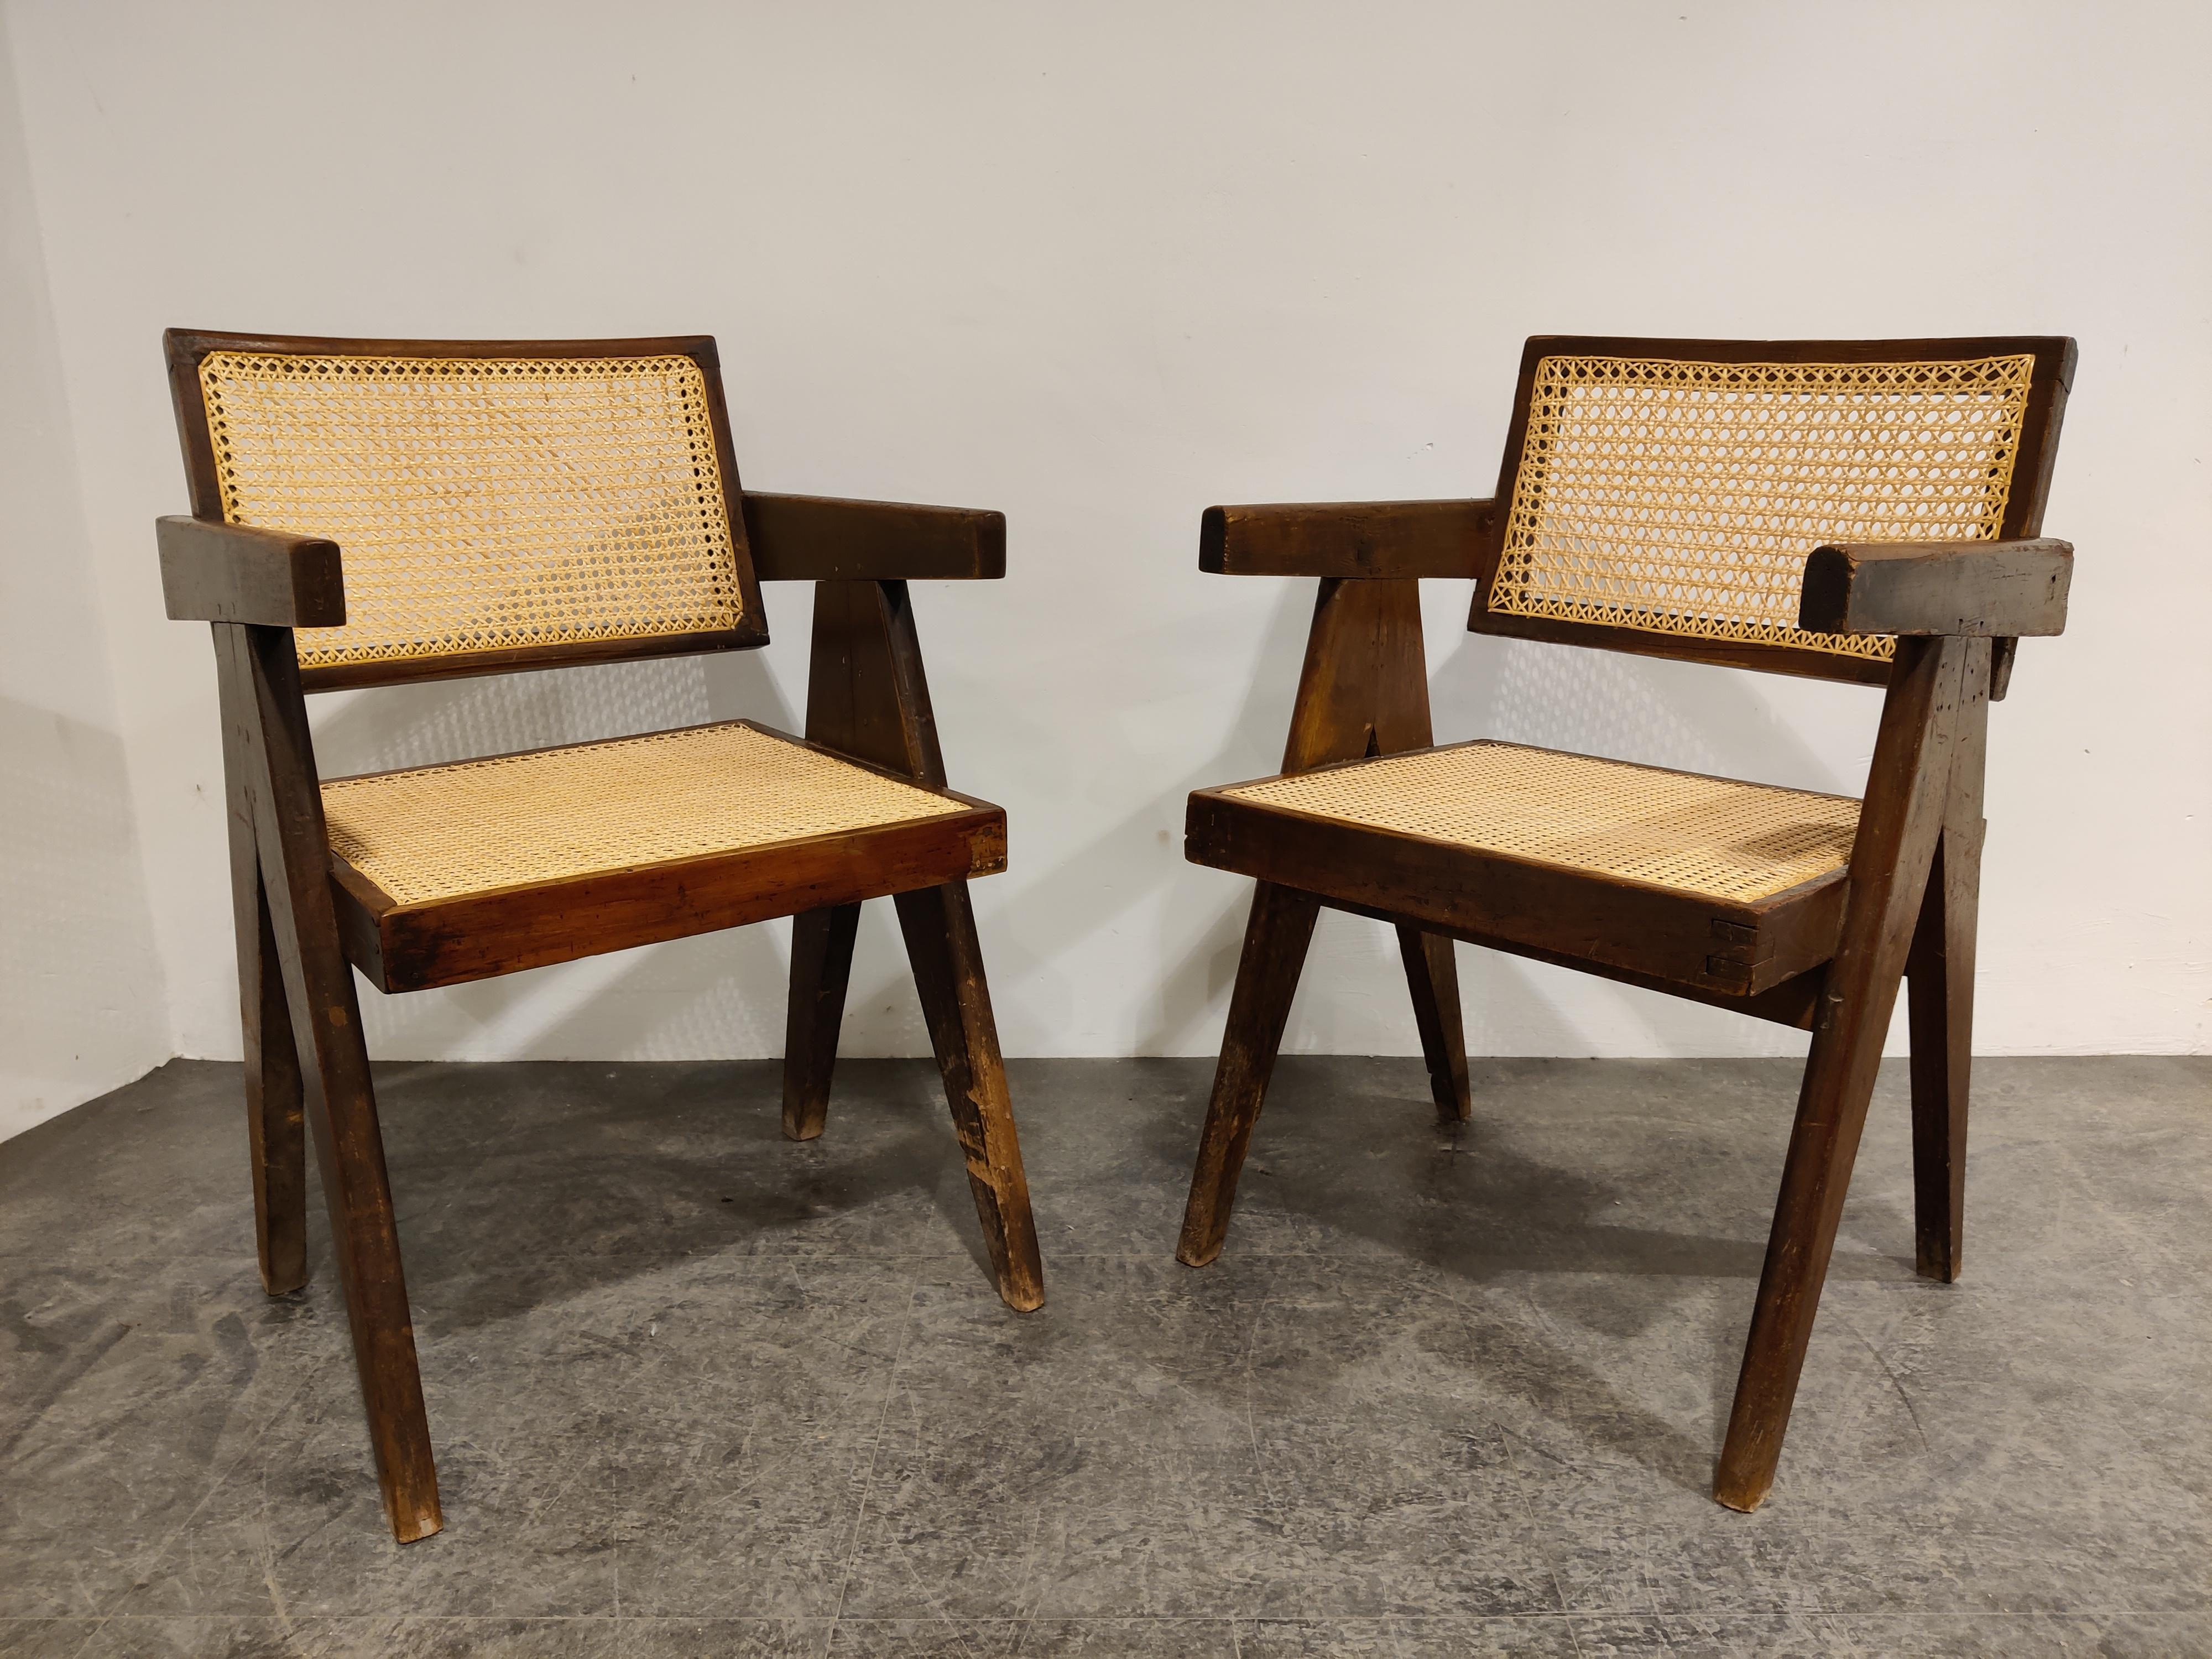 Swiss Pair of Pierre Jeanneret Chandigarh Office Cane Chairs, 1950s